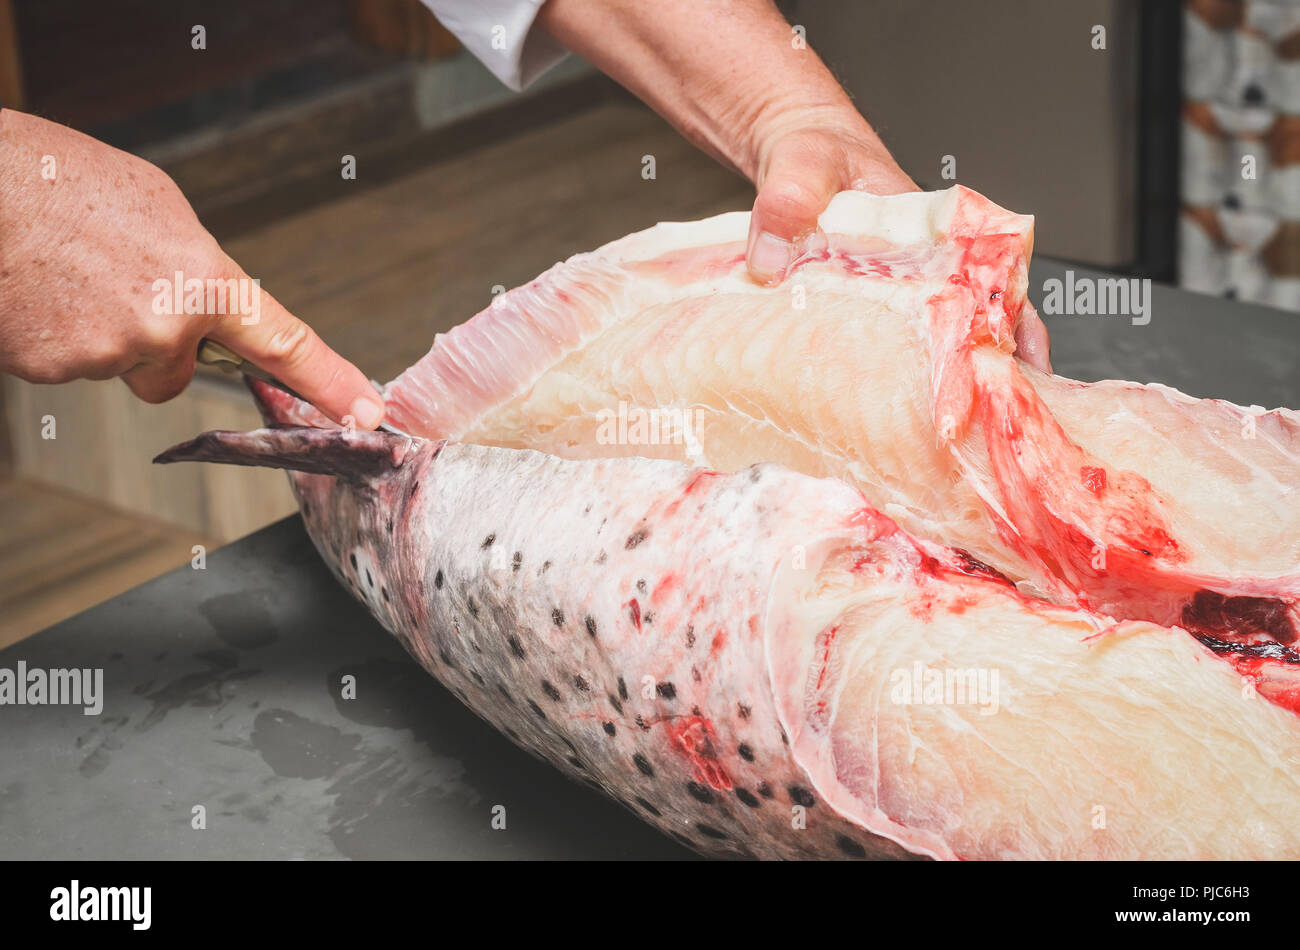 Cleaning the fish and cutting it. Hands of a fishmonger slicing Pintado fish. Pintado fish cutted in half. Brazilian Pintado fish, leather fish with r Stock Photo